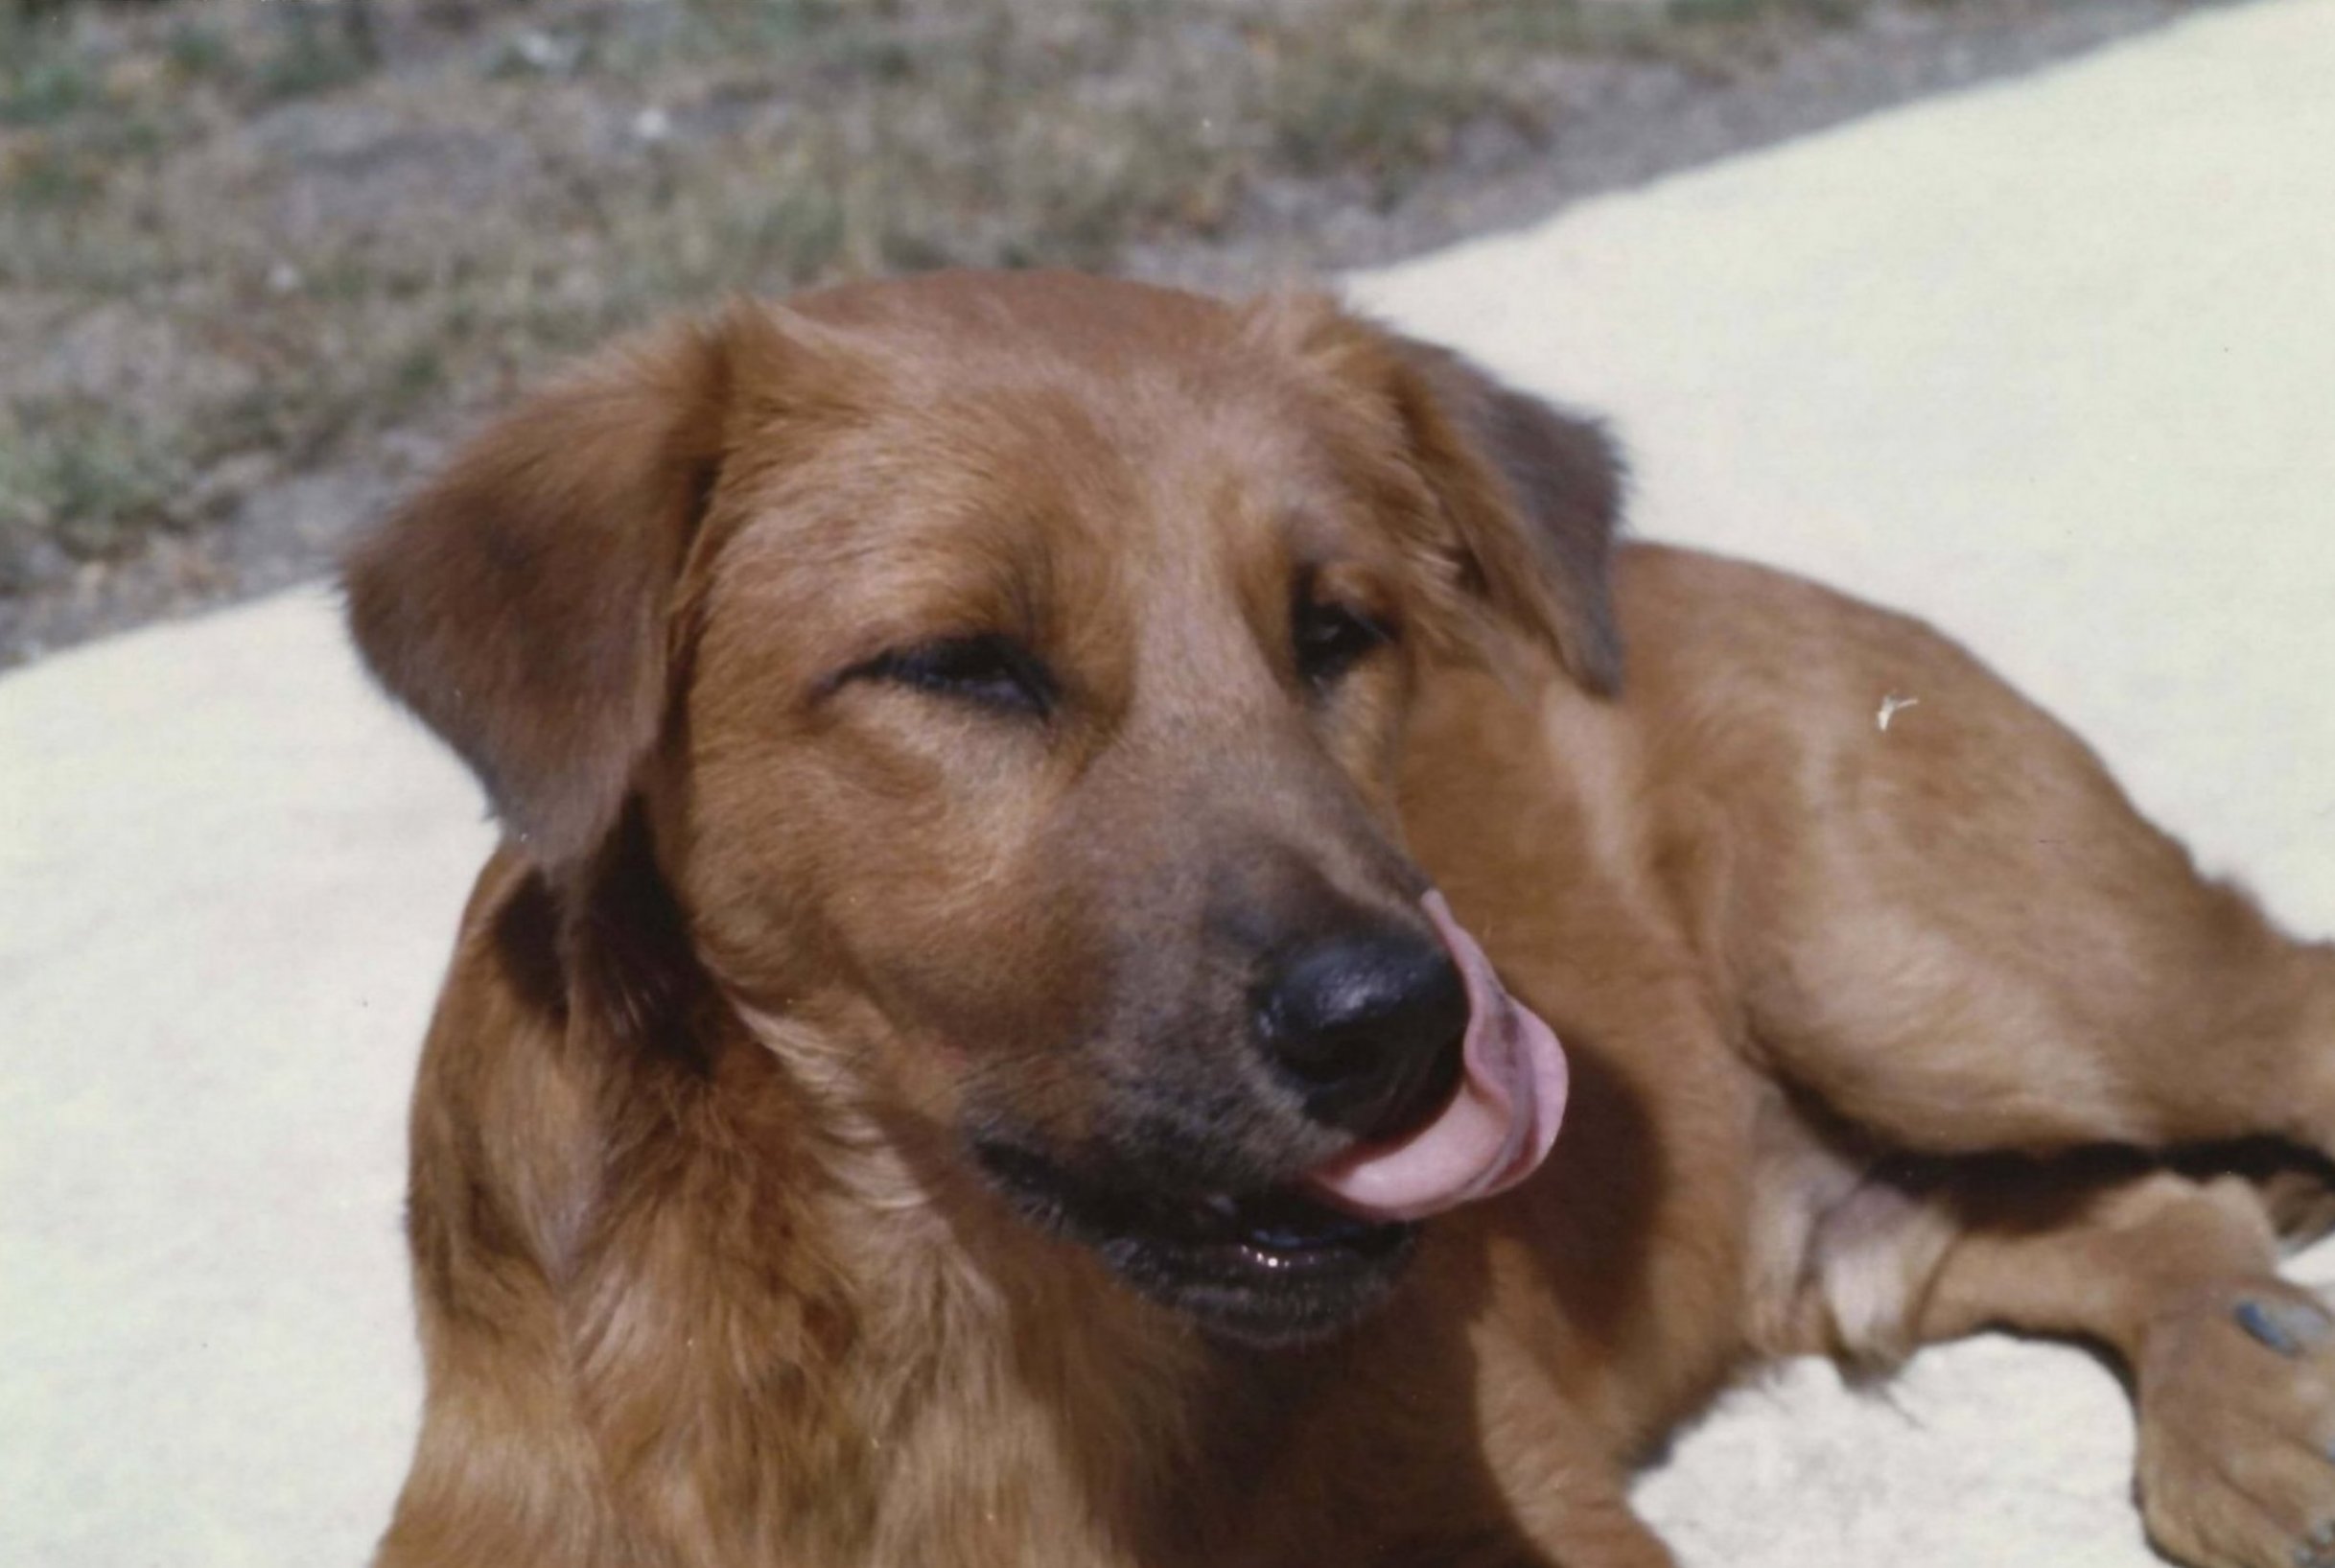 A young brown dog, licking his lips.